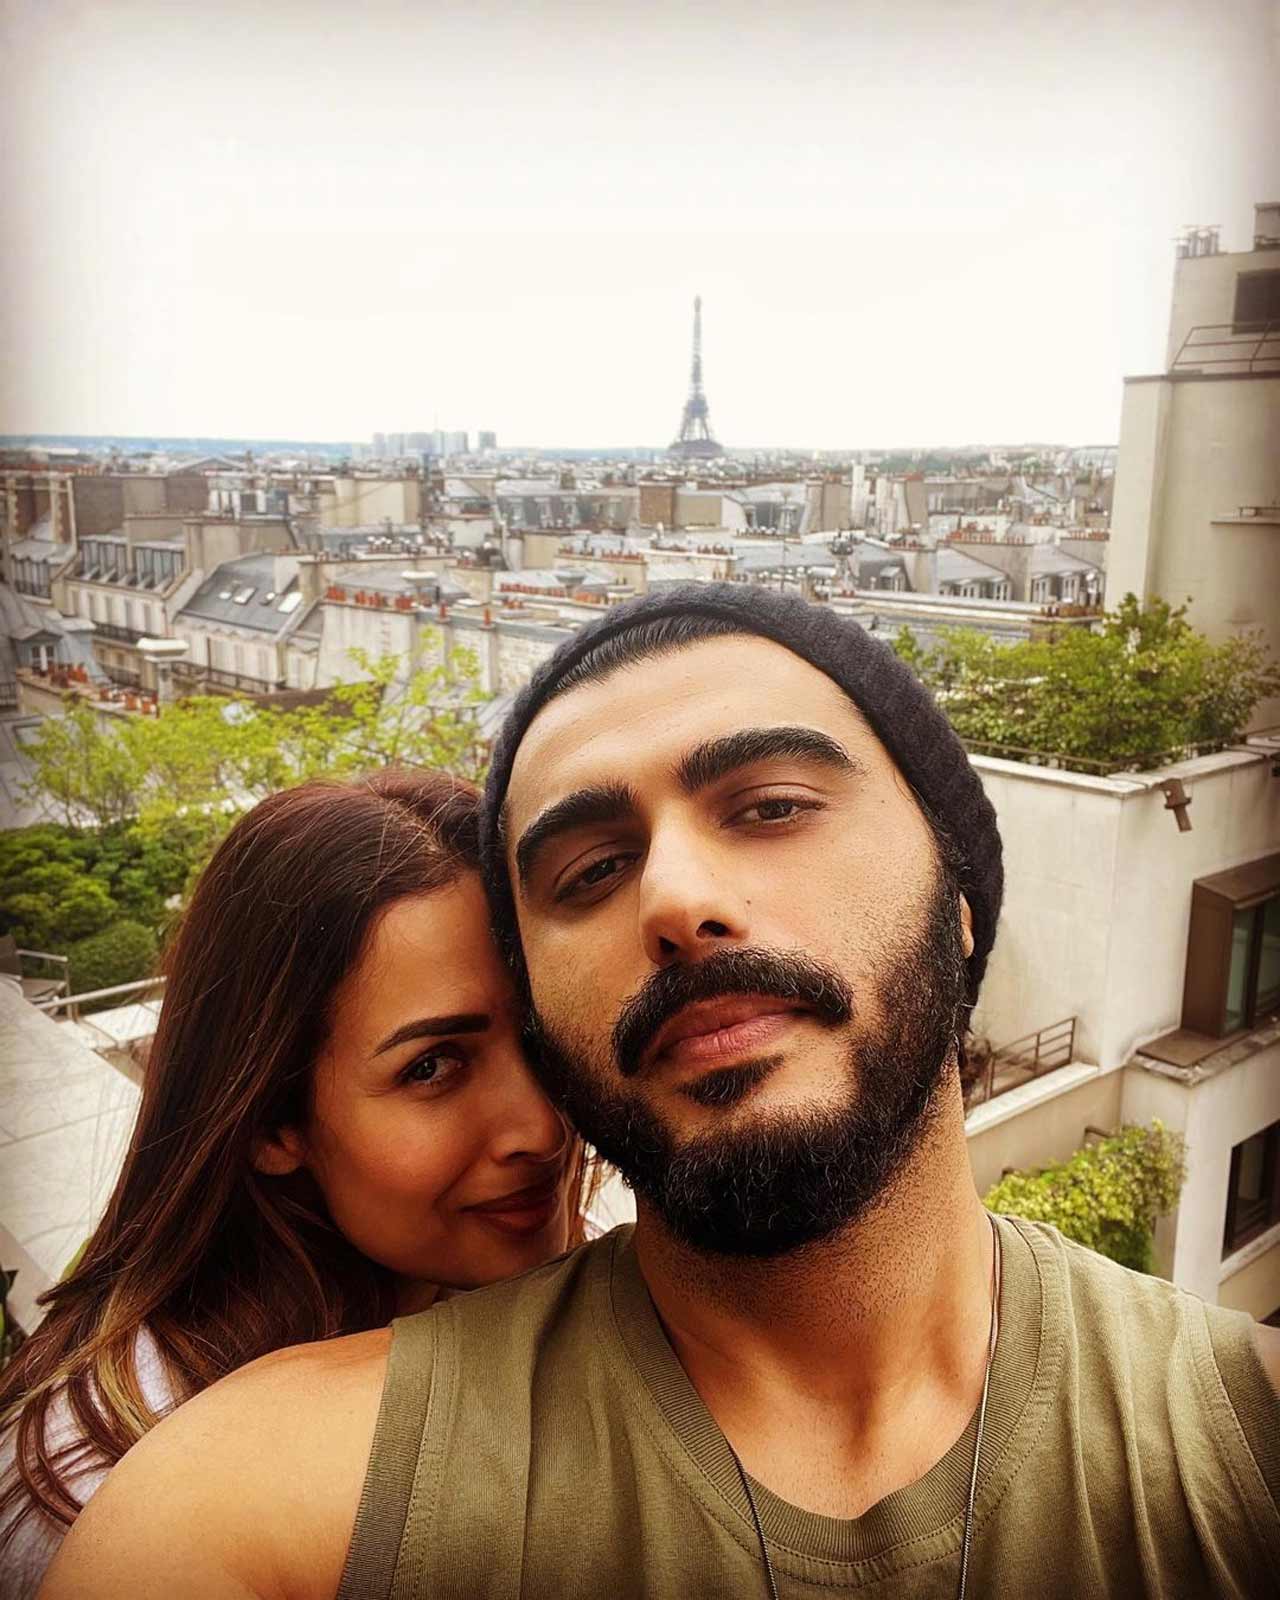 In the second picture, Malaika seemed to inch closer to Arjun as the latter gave a broody look with his on-spot beard against the excellent Paris backdrop